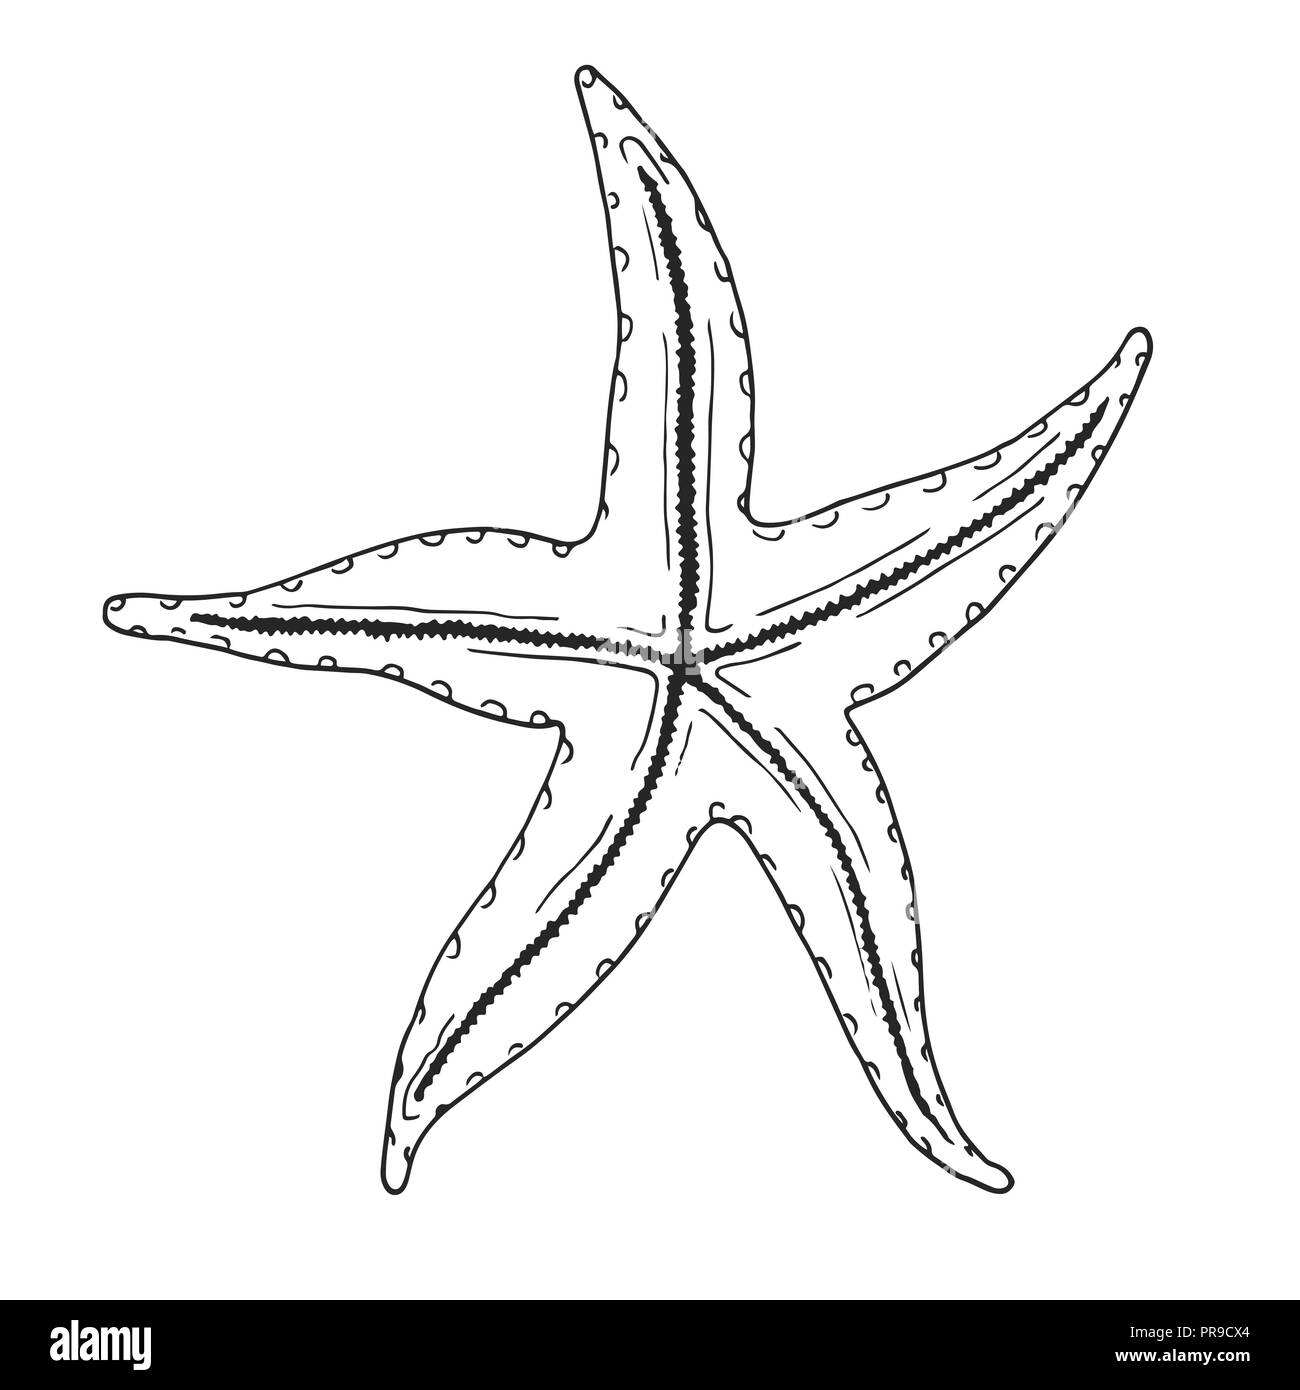 Hand Drawn Sketch of Starfish in Black Isolated on White Background.  Detailed Vintage Style Drawing Stock Vector - Illustration of black, line:  124643605